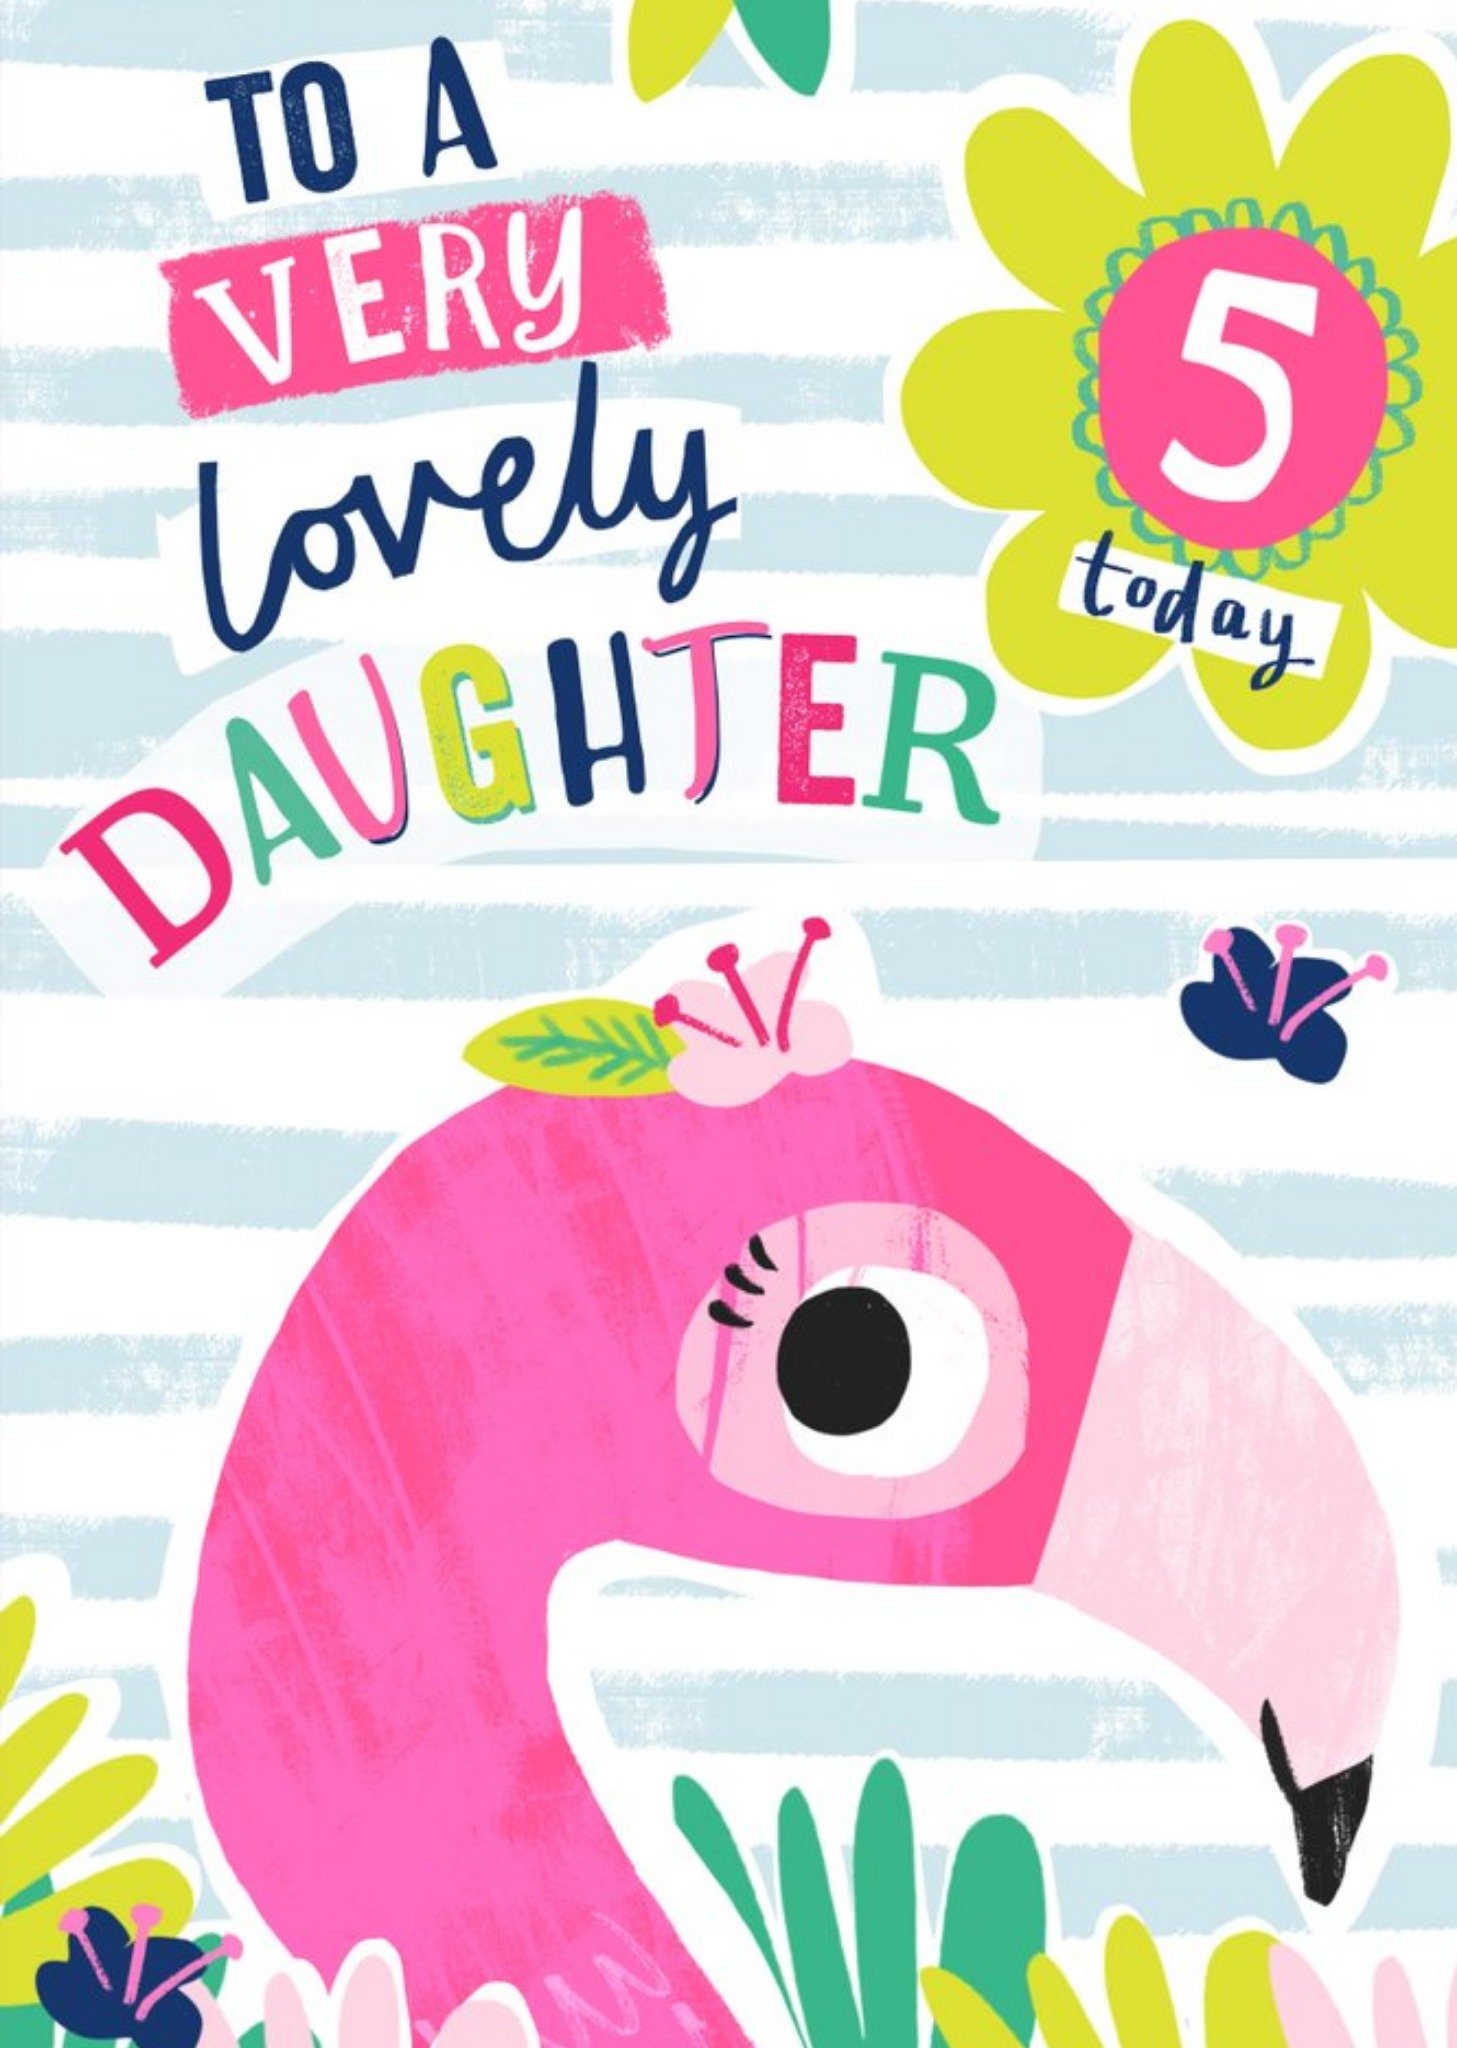 Moonpig Flamingo To A Very Lovely Daughter 5 Today Birthday Card, Large